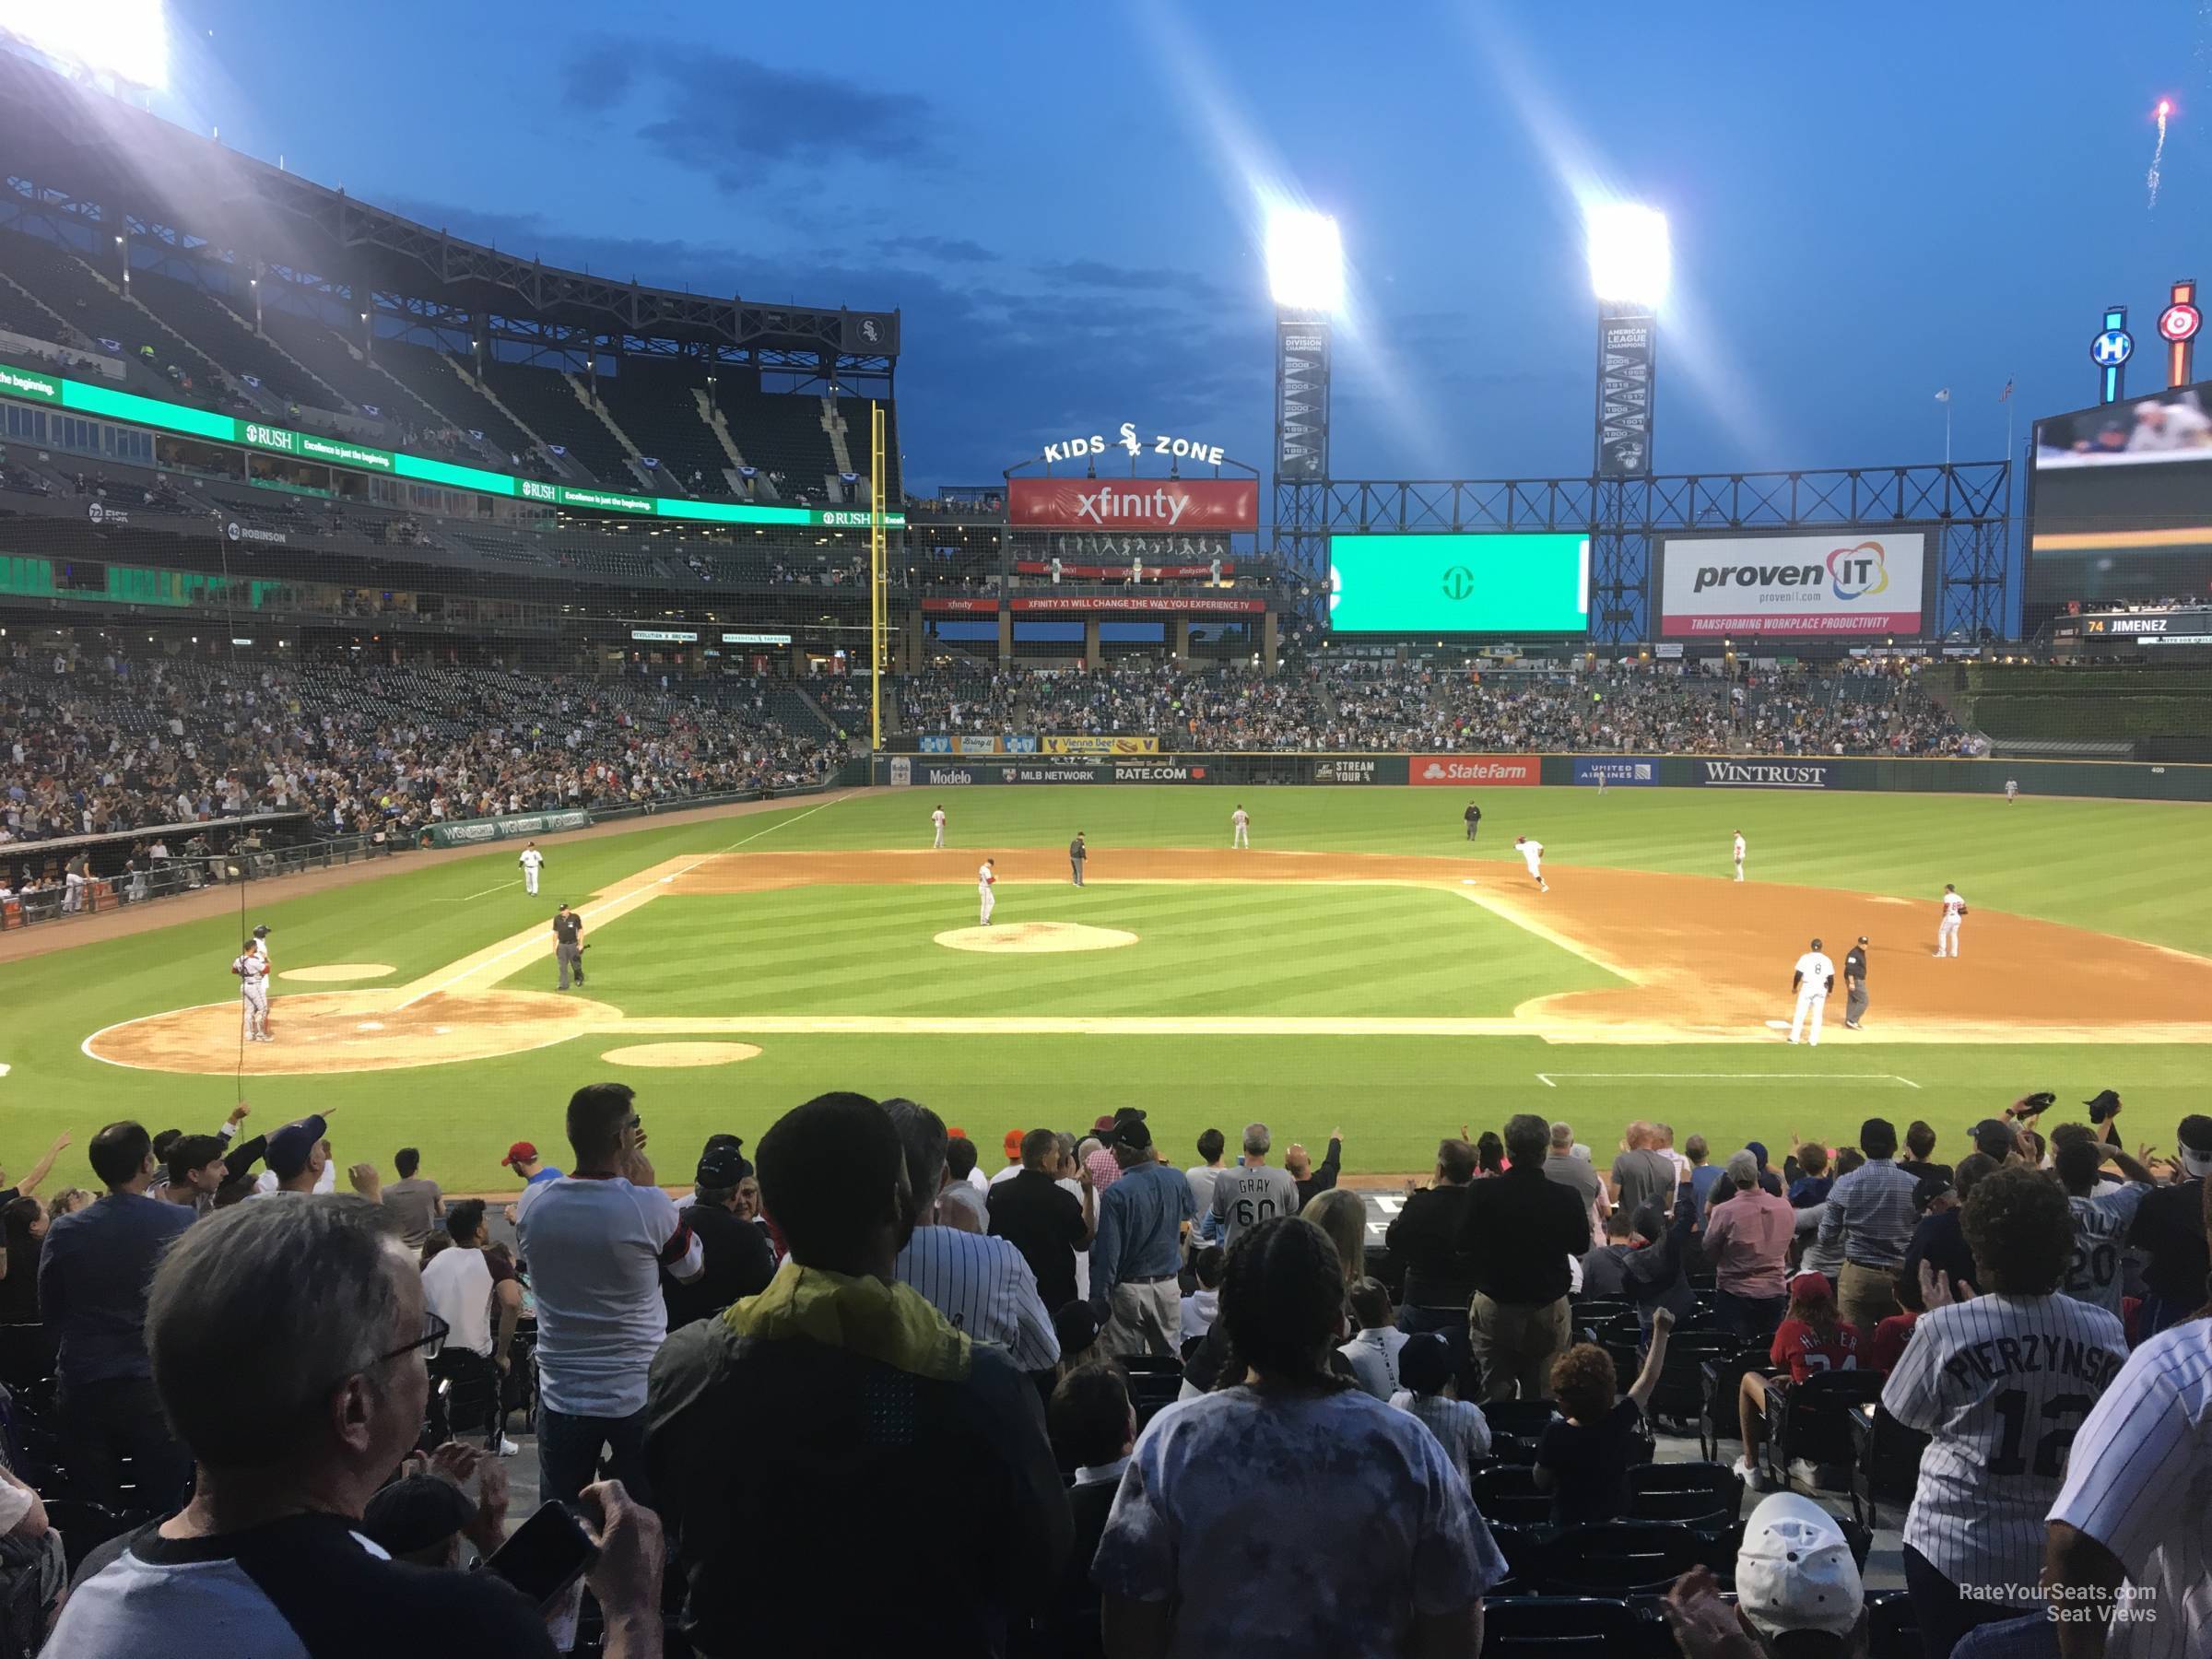 section 126, row 24 seat view  - guaranteed rate field